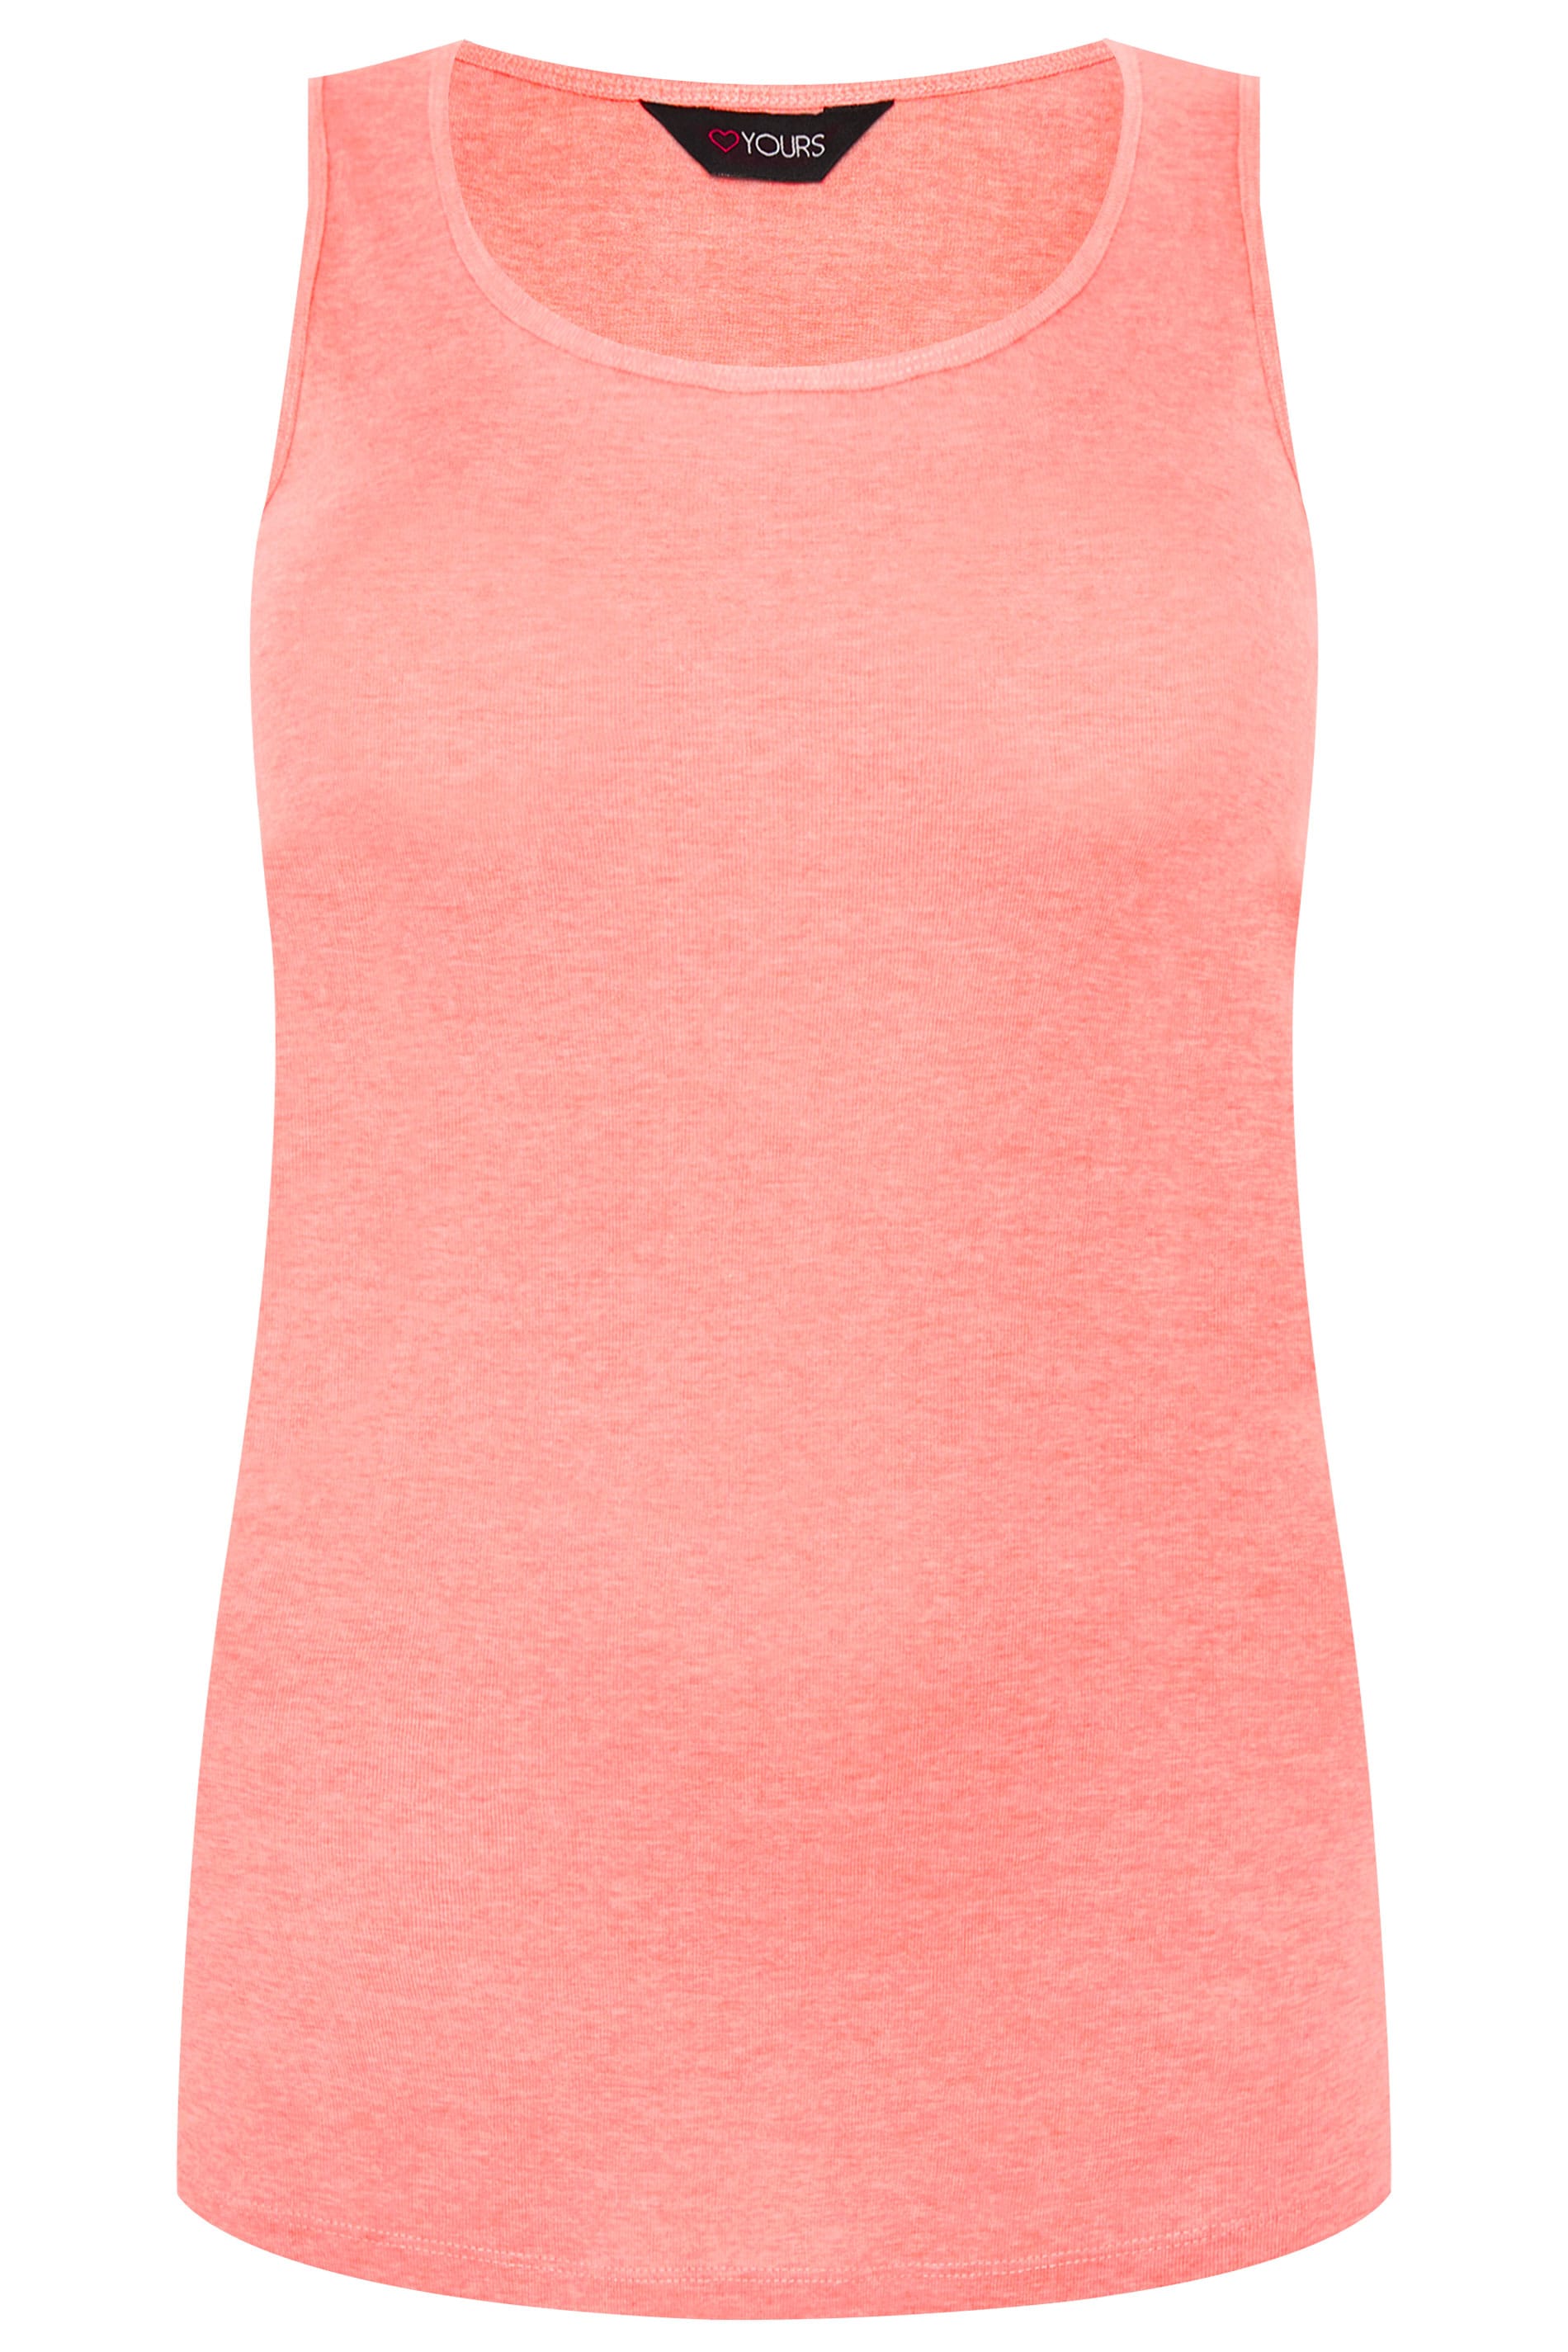 Light Pink Vest Top | Sizes 16 to 36 | Yours Clothing